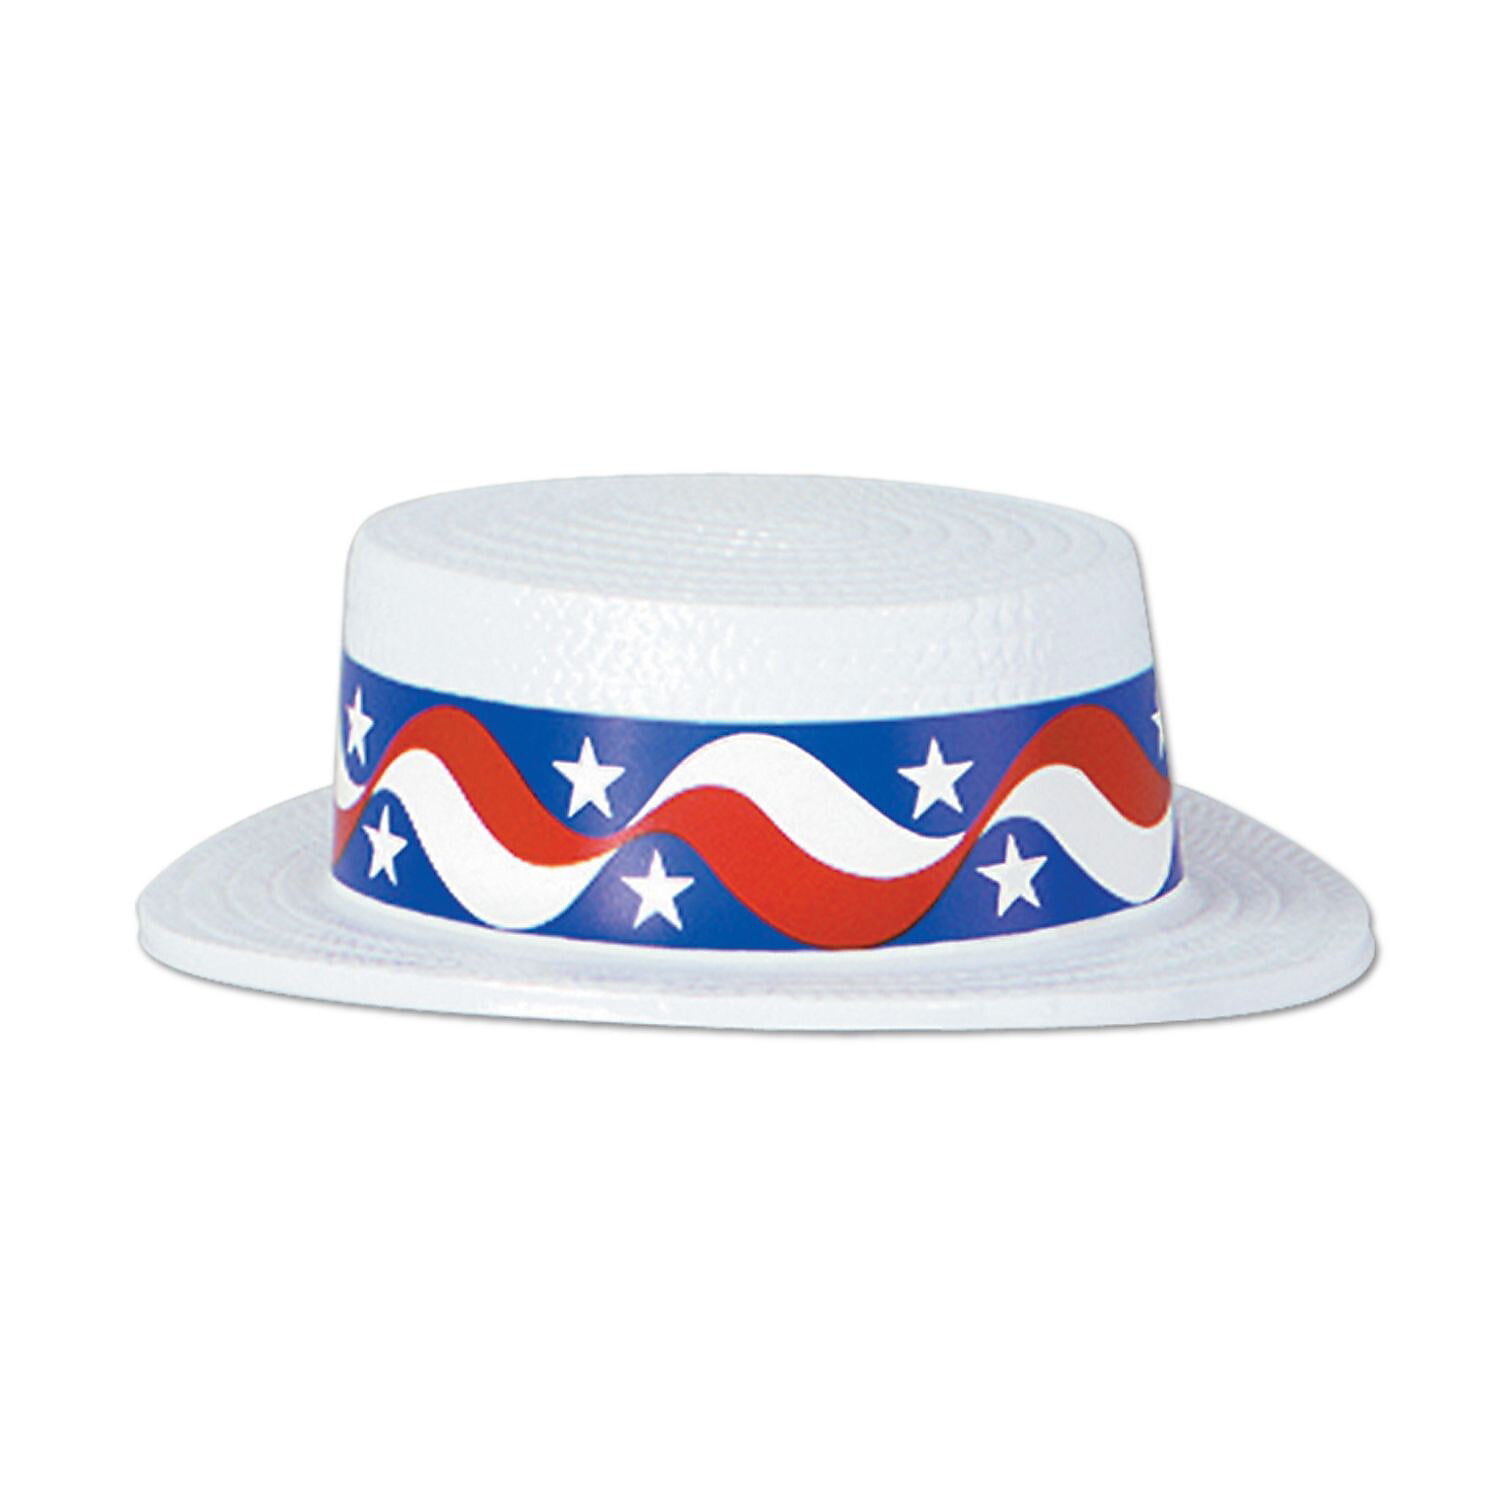 USA SELLER  20 SODA JERK'S HATS PAPER WHITE  FREE SHIPPING US ONLY 